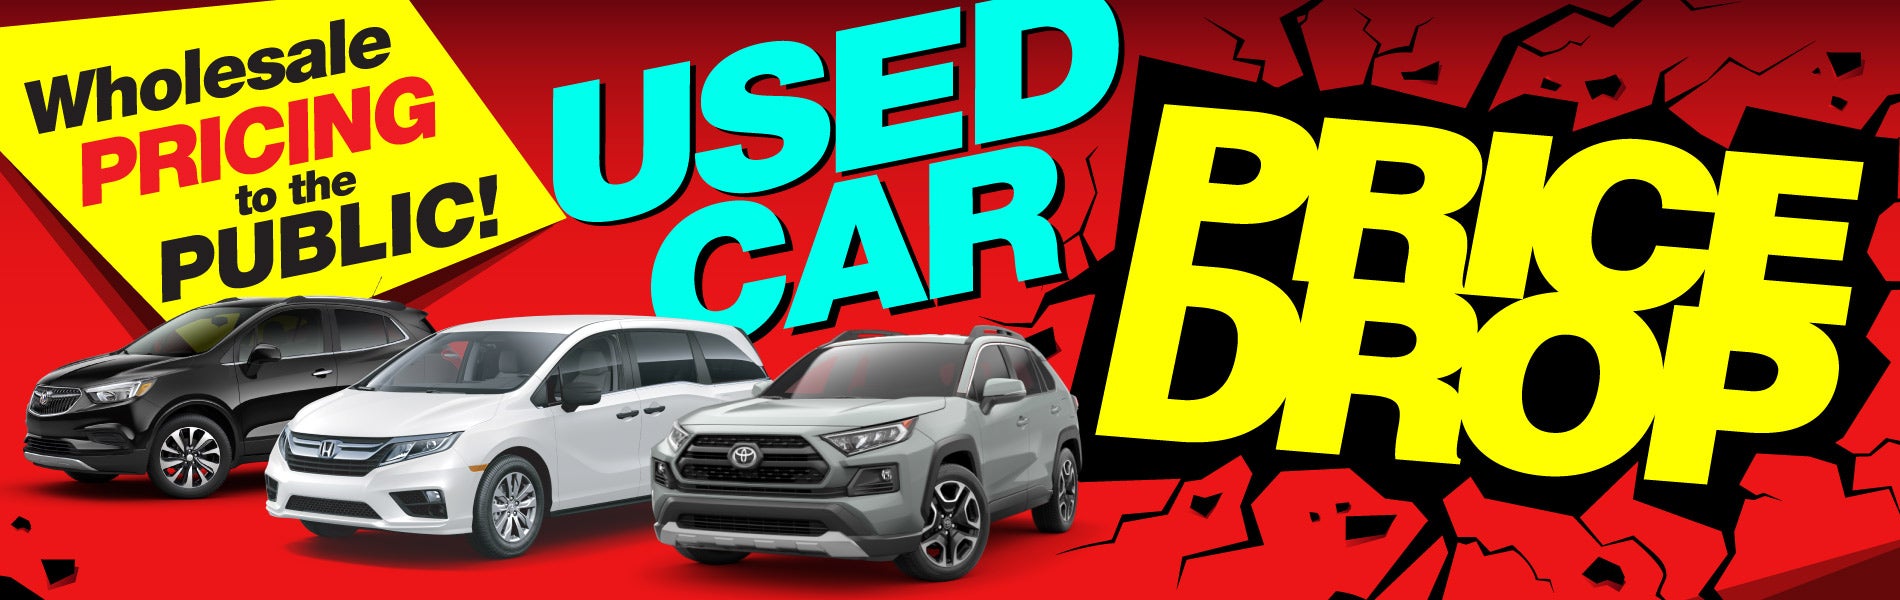 Used Car Price Drop! Wholesale Pricing to the Public